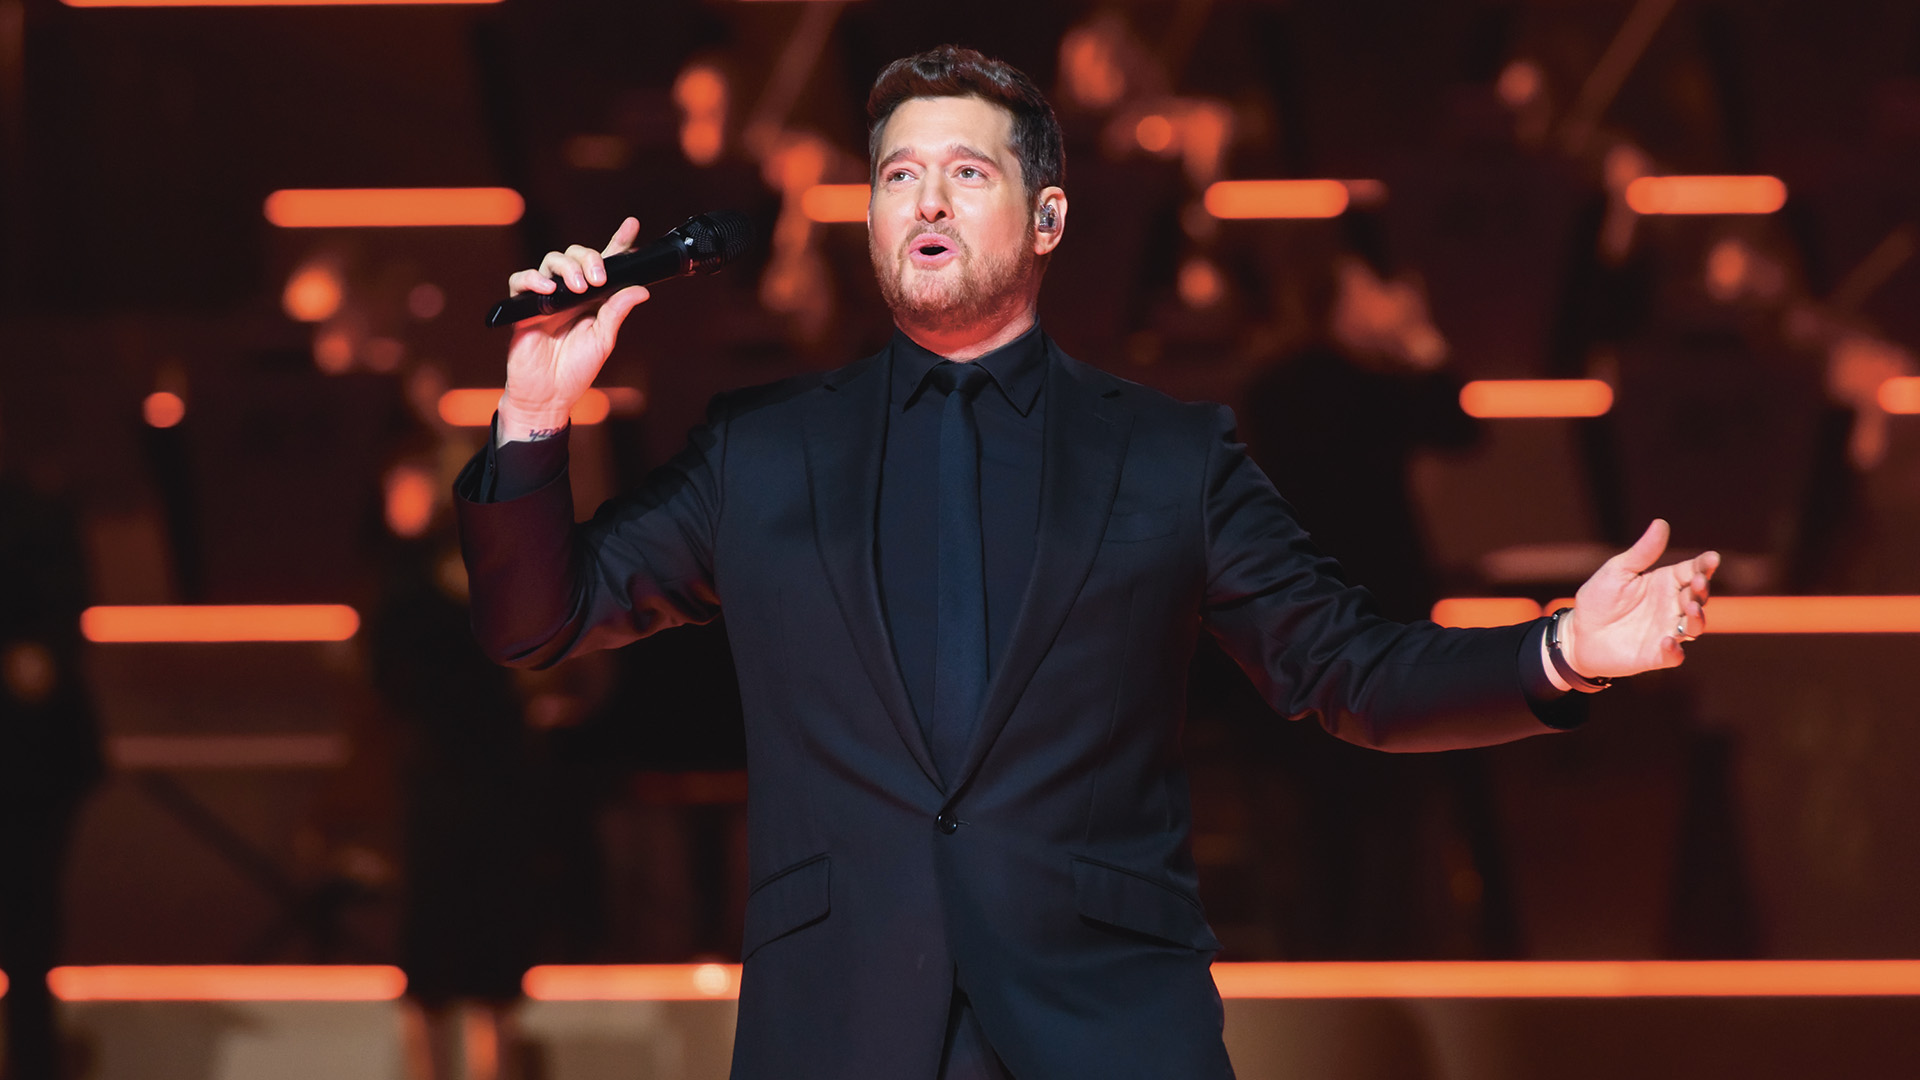 Michael Bublé singing on stage